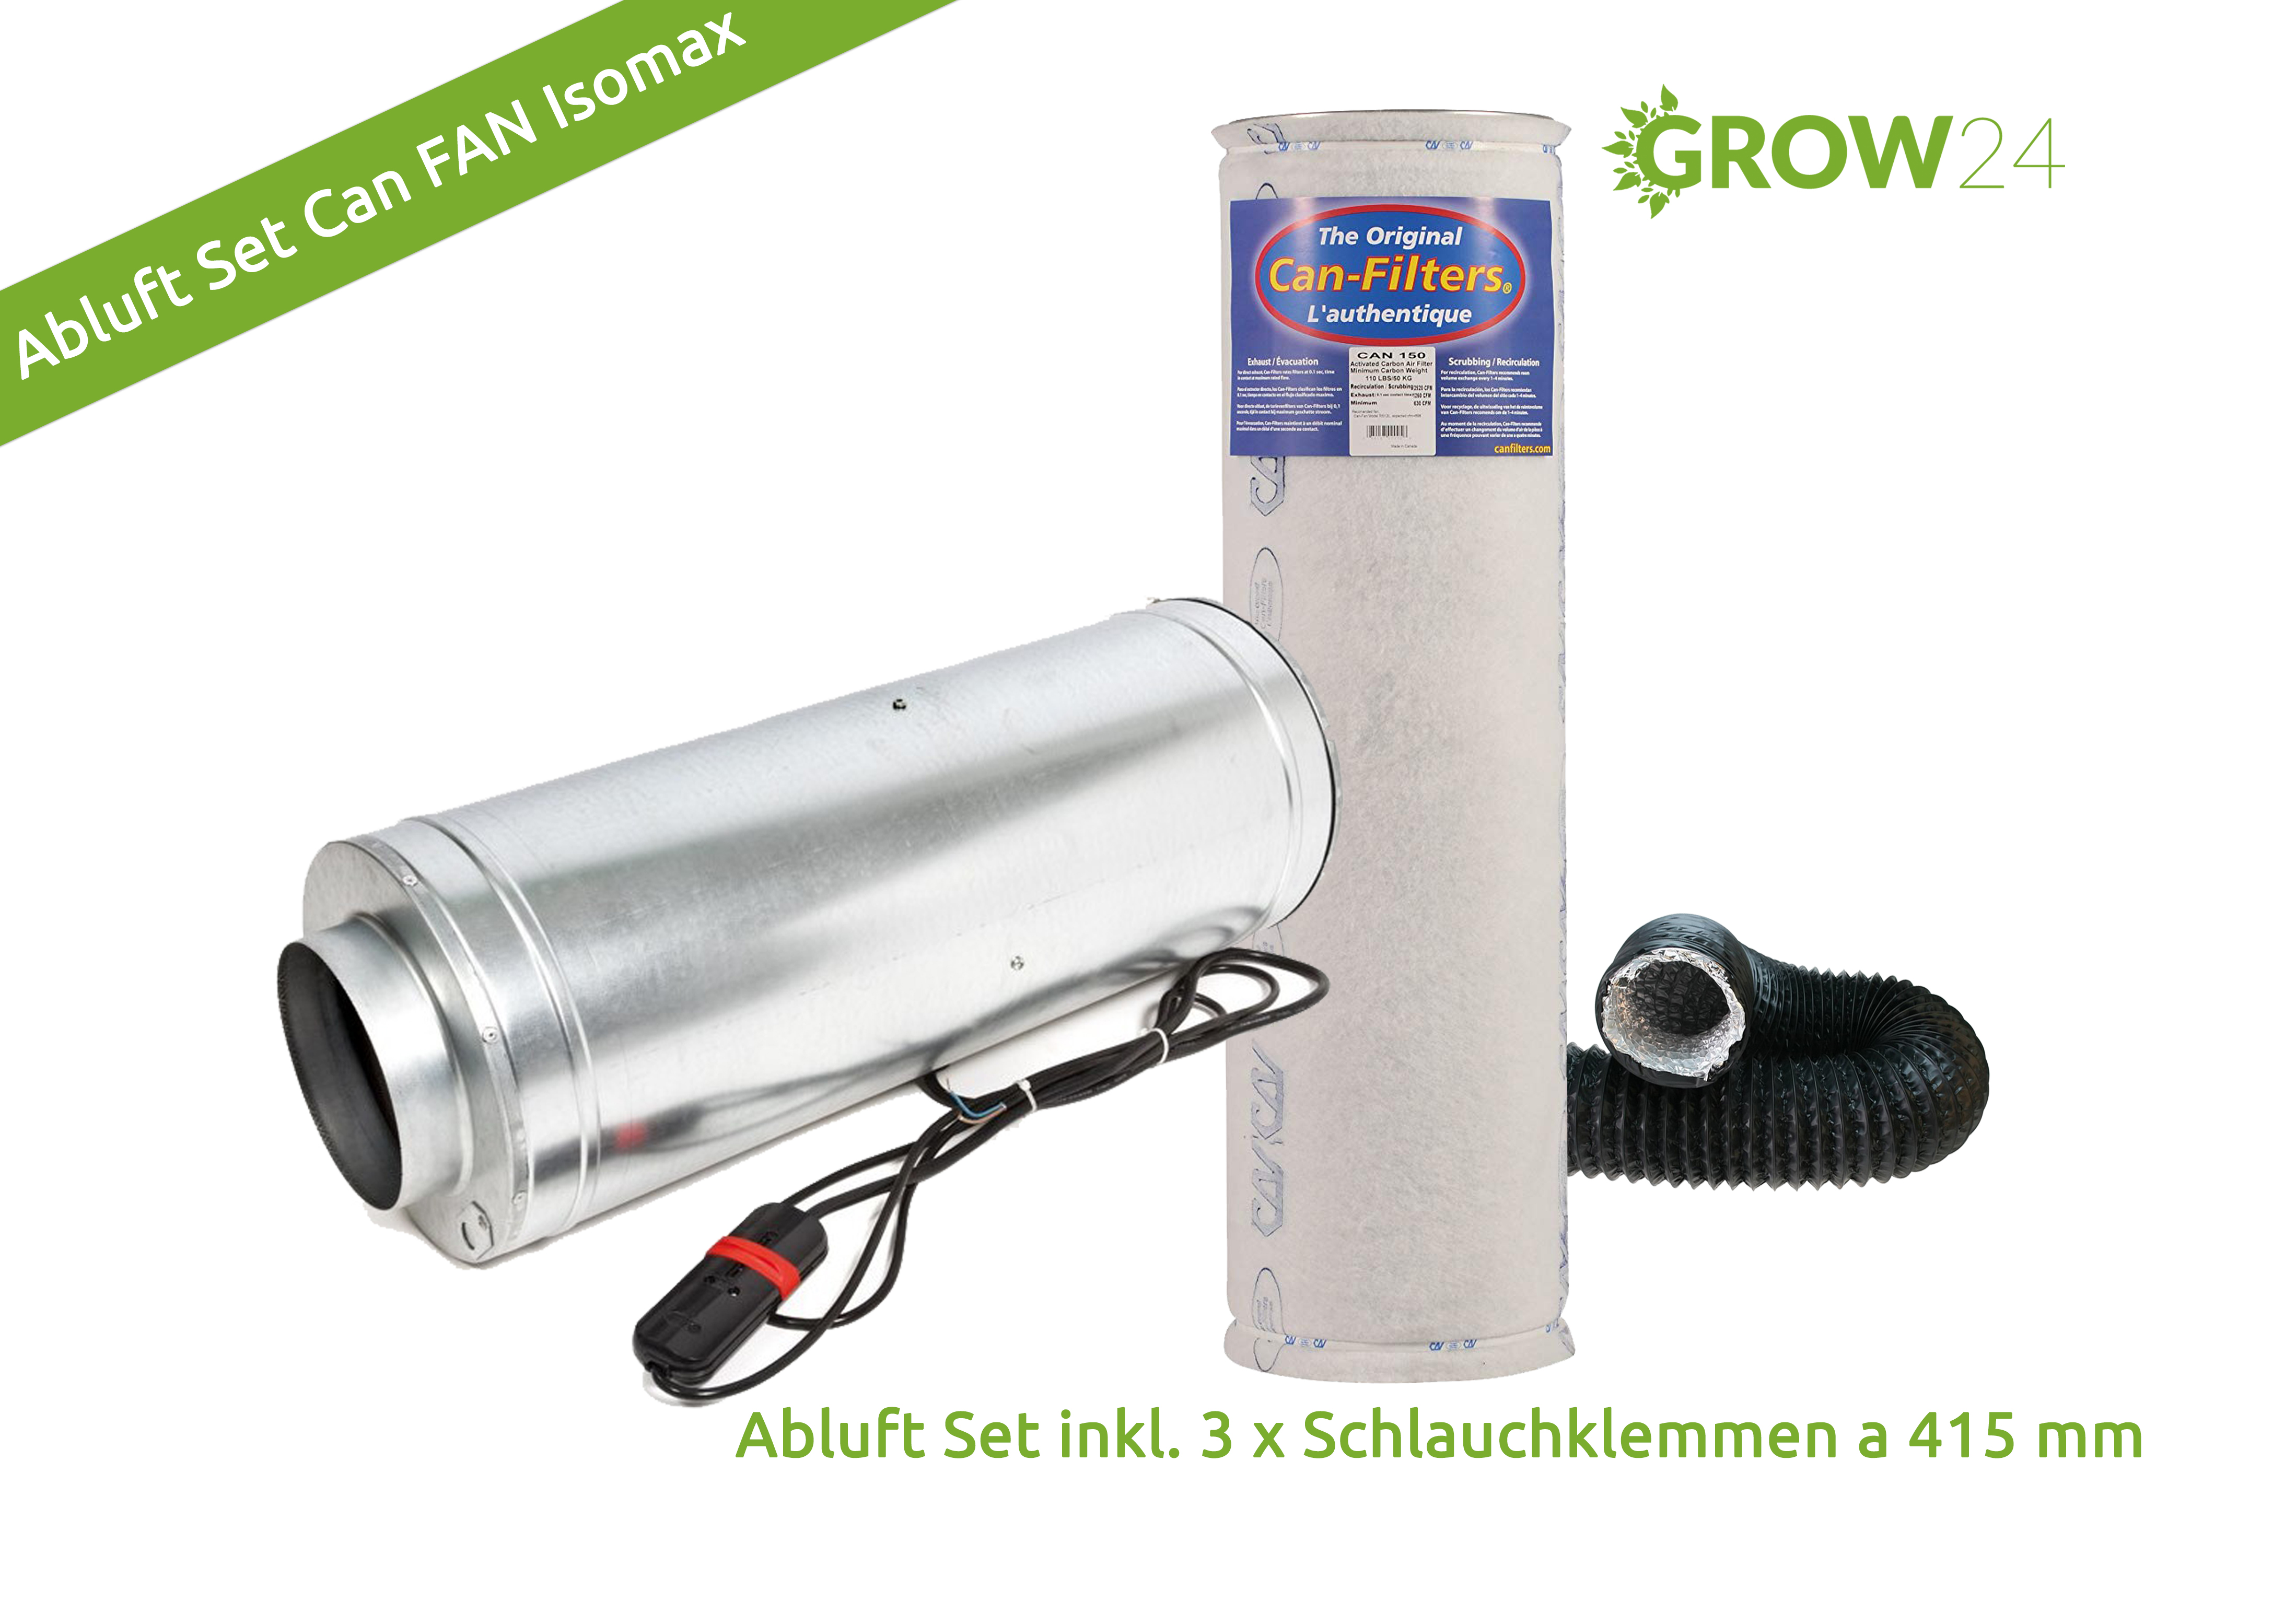 Abluft-Set Can Fan Isomax Silent 2310 cbm Industrie